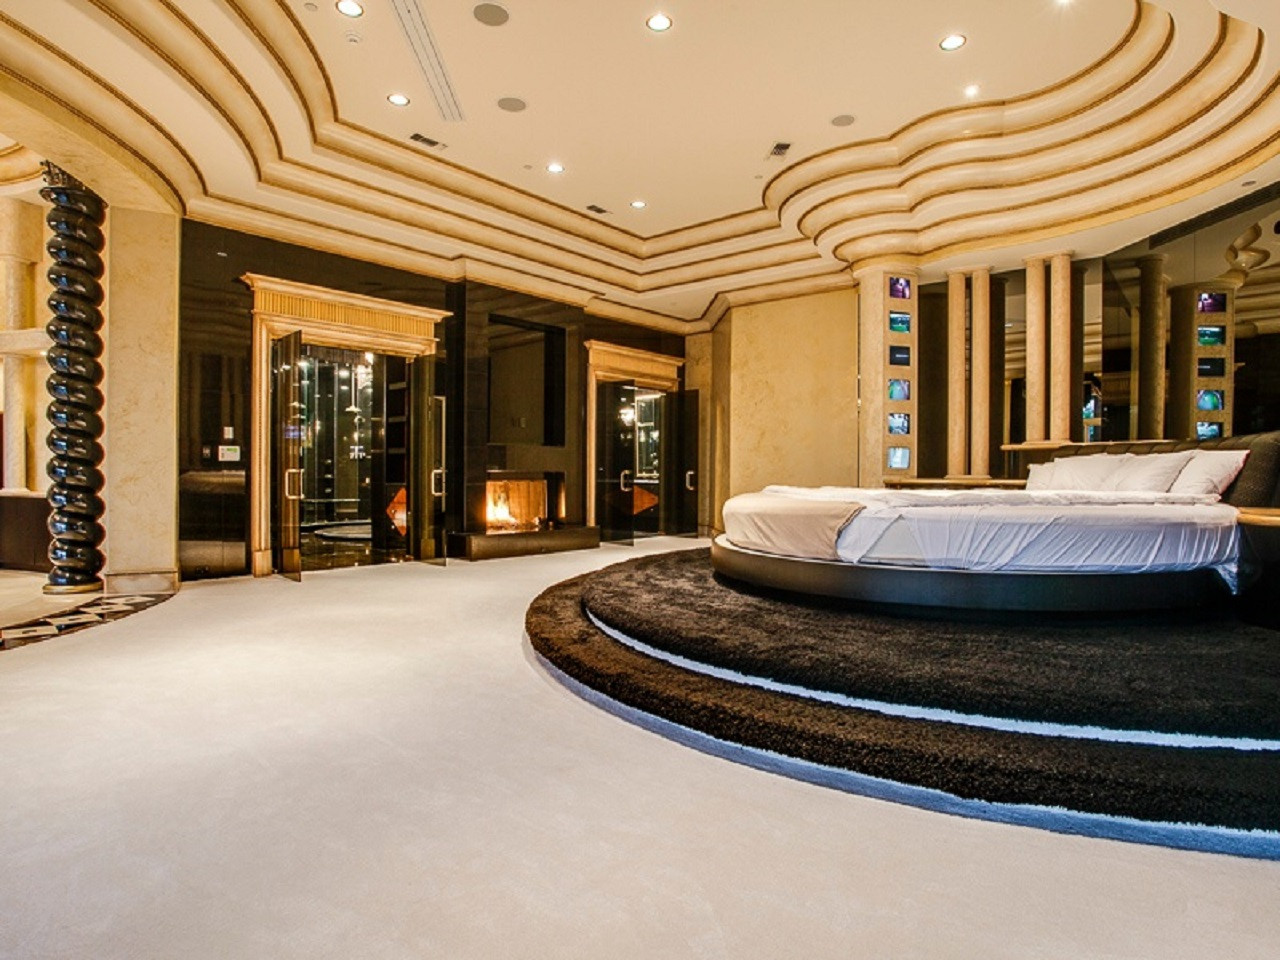 Luxury Master Bedroom Furniture
 15 Luxurious Master Bedrooms With Round Beds Interior